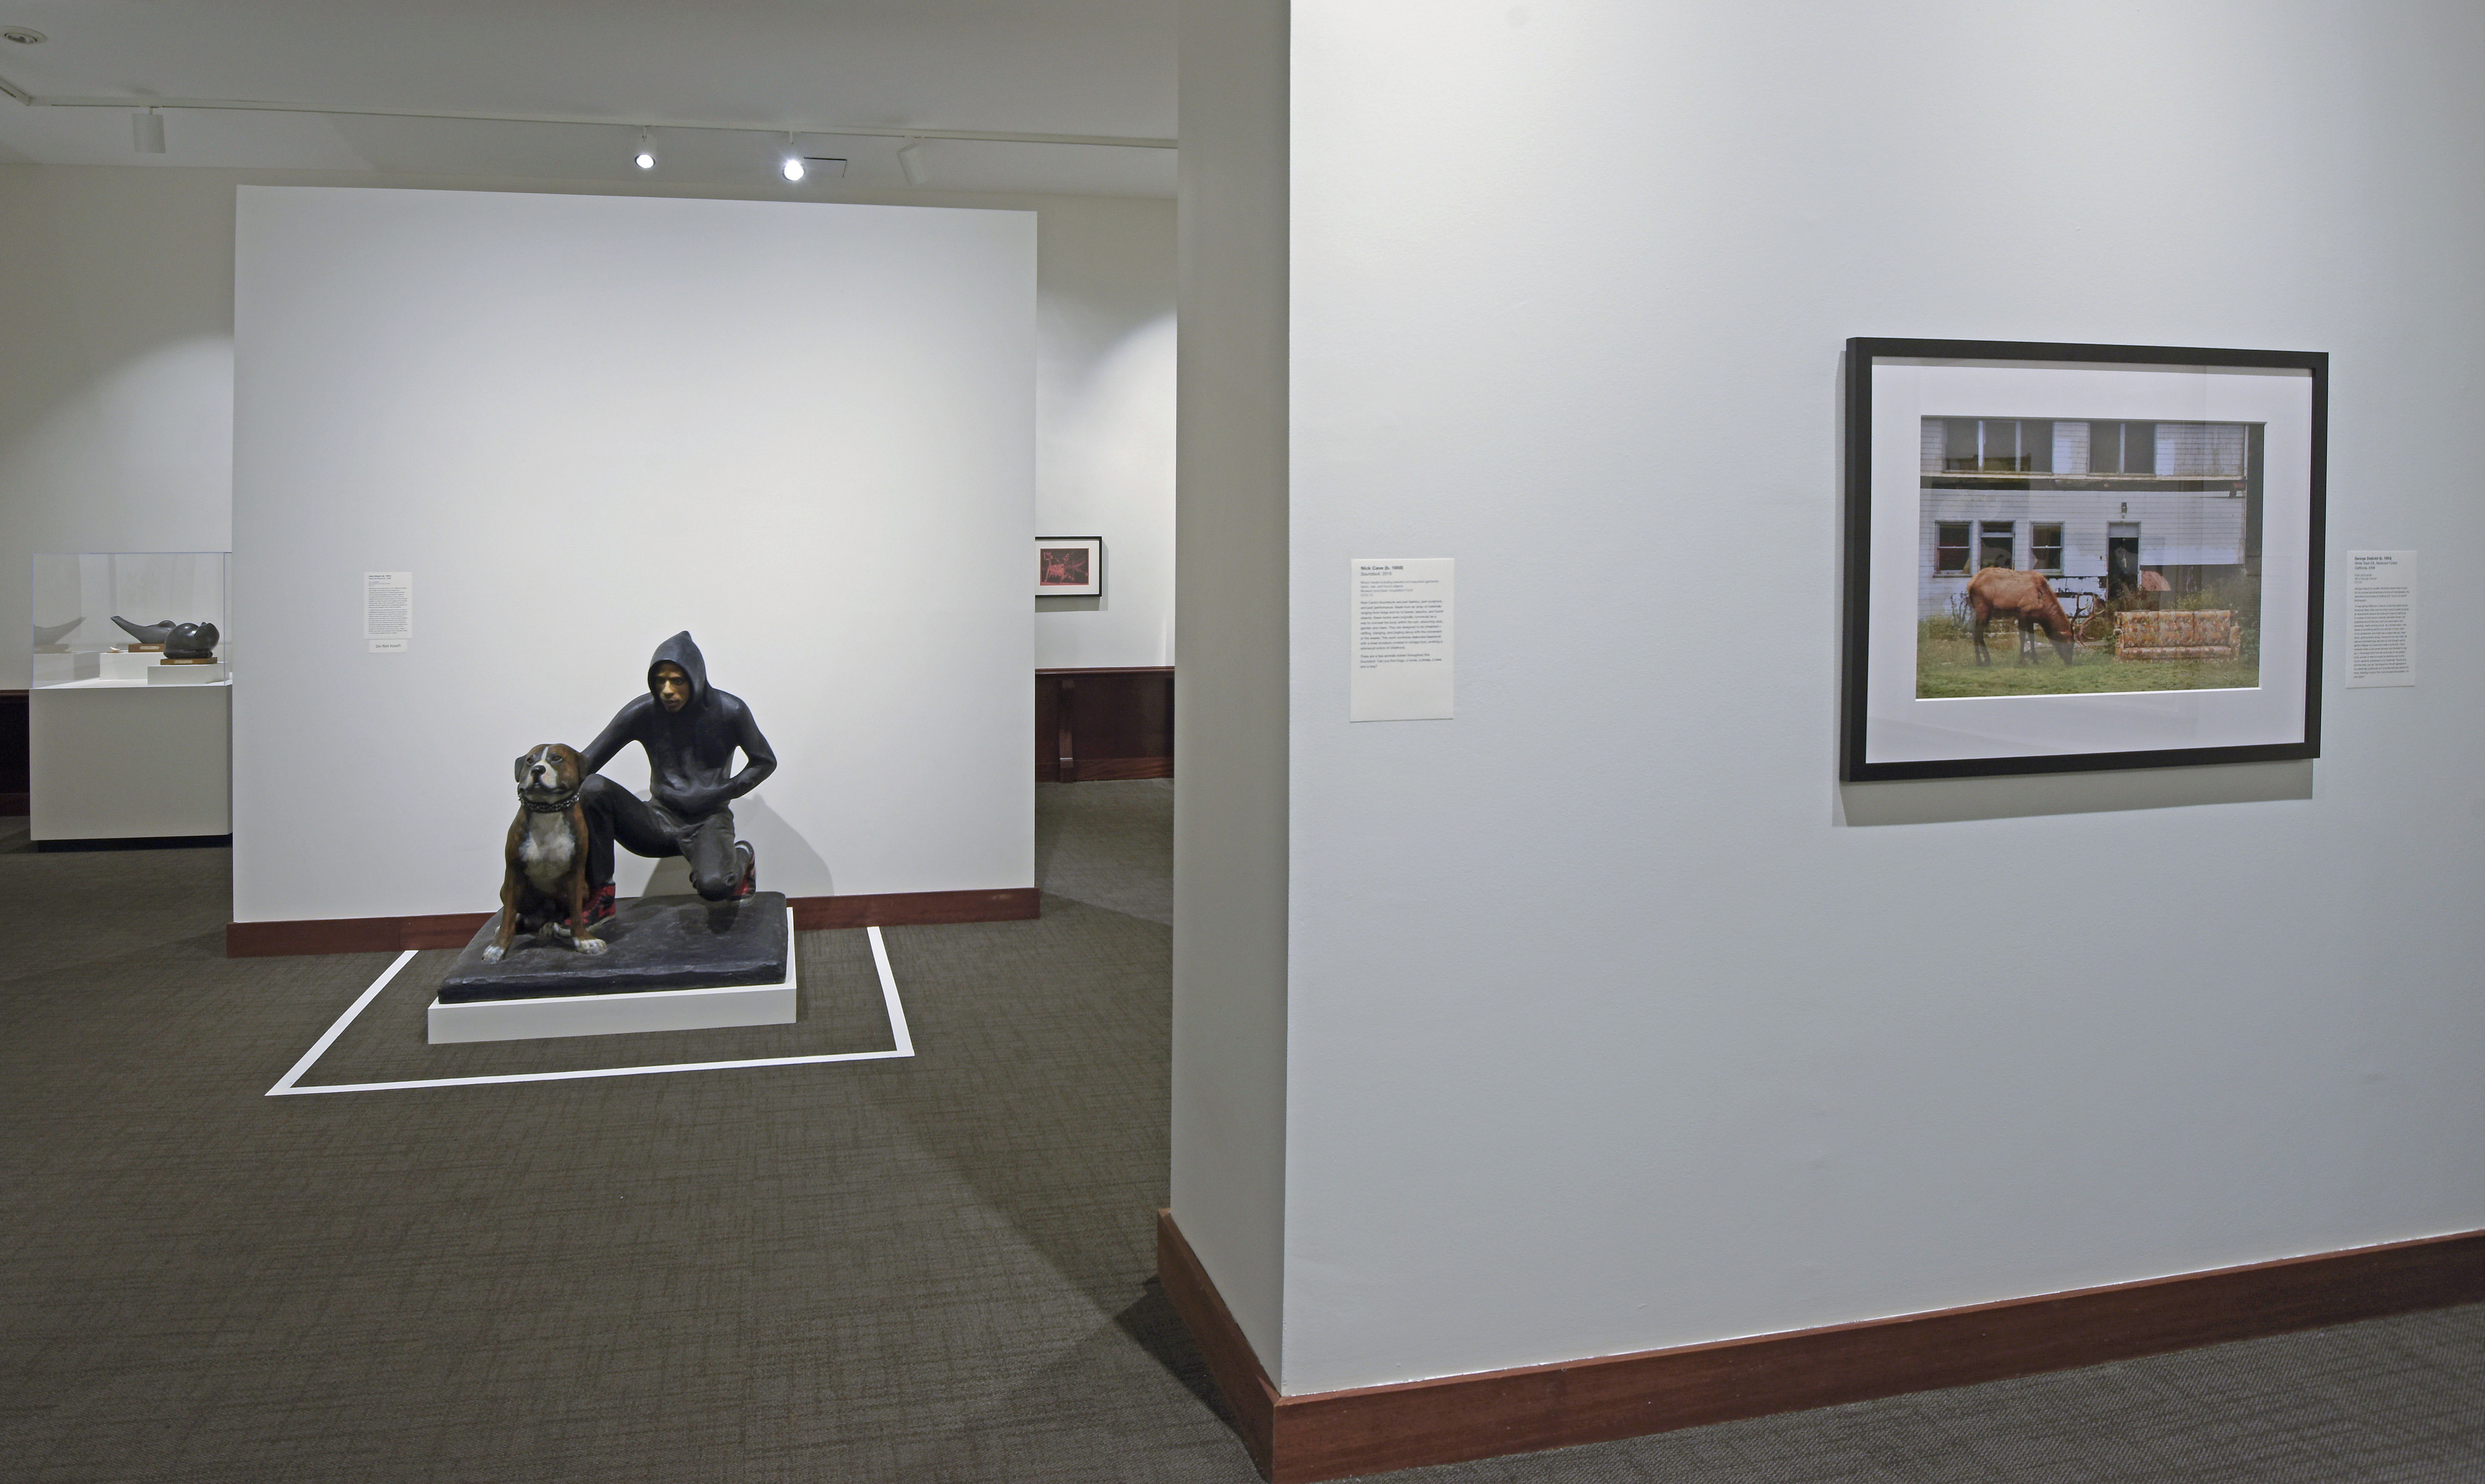 Gallery view in the uncaged exhibition. A painting and a sculpture of a teen and dog are in view.